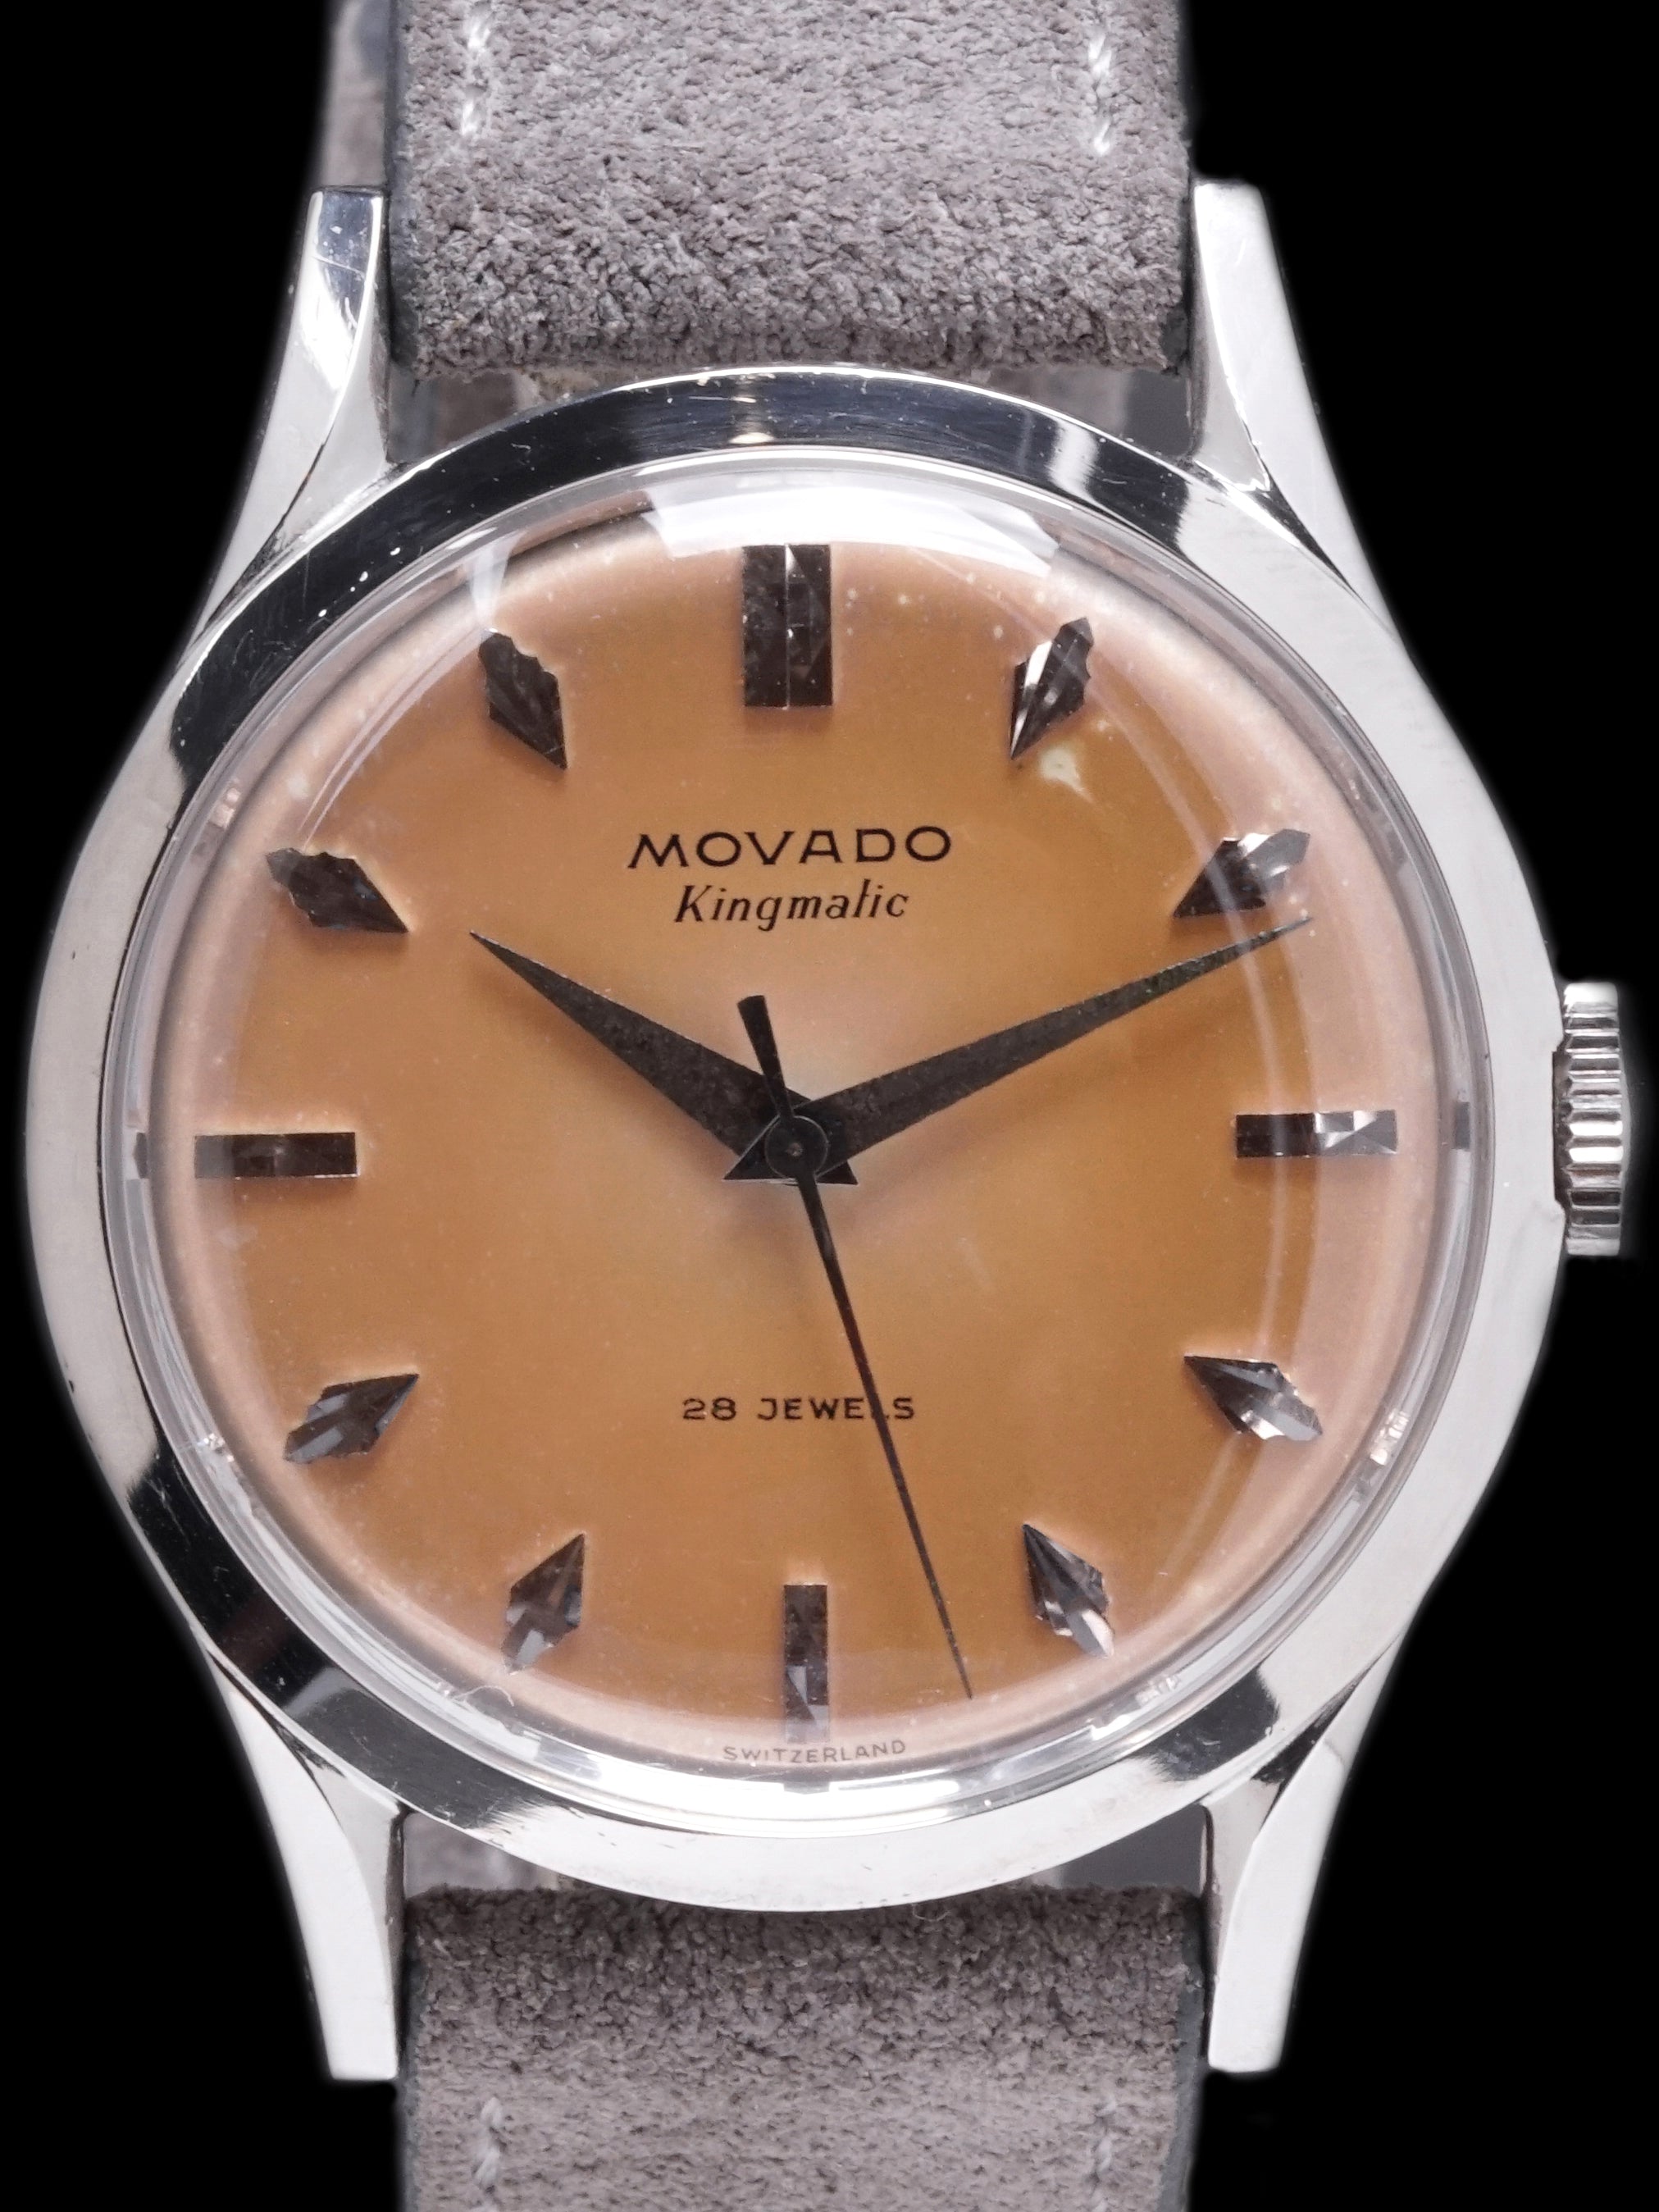 Tropical 1950s Movado Kingmatic (Ref. 11179) "Fancy Markers"